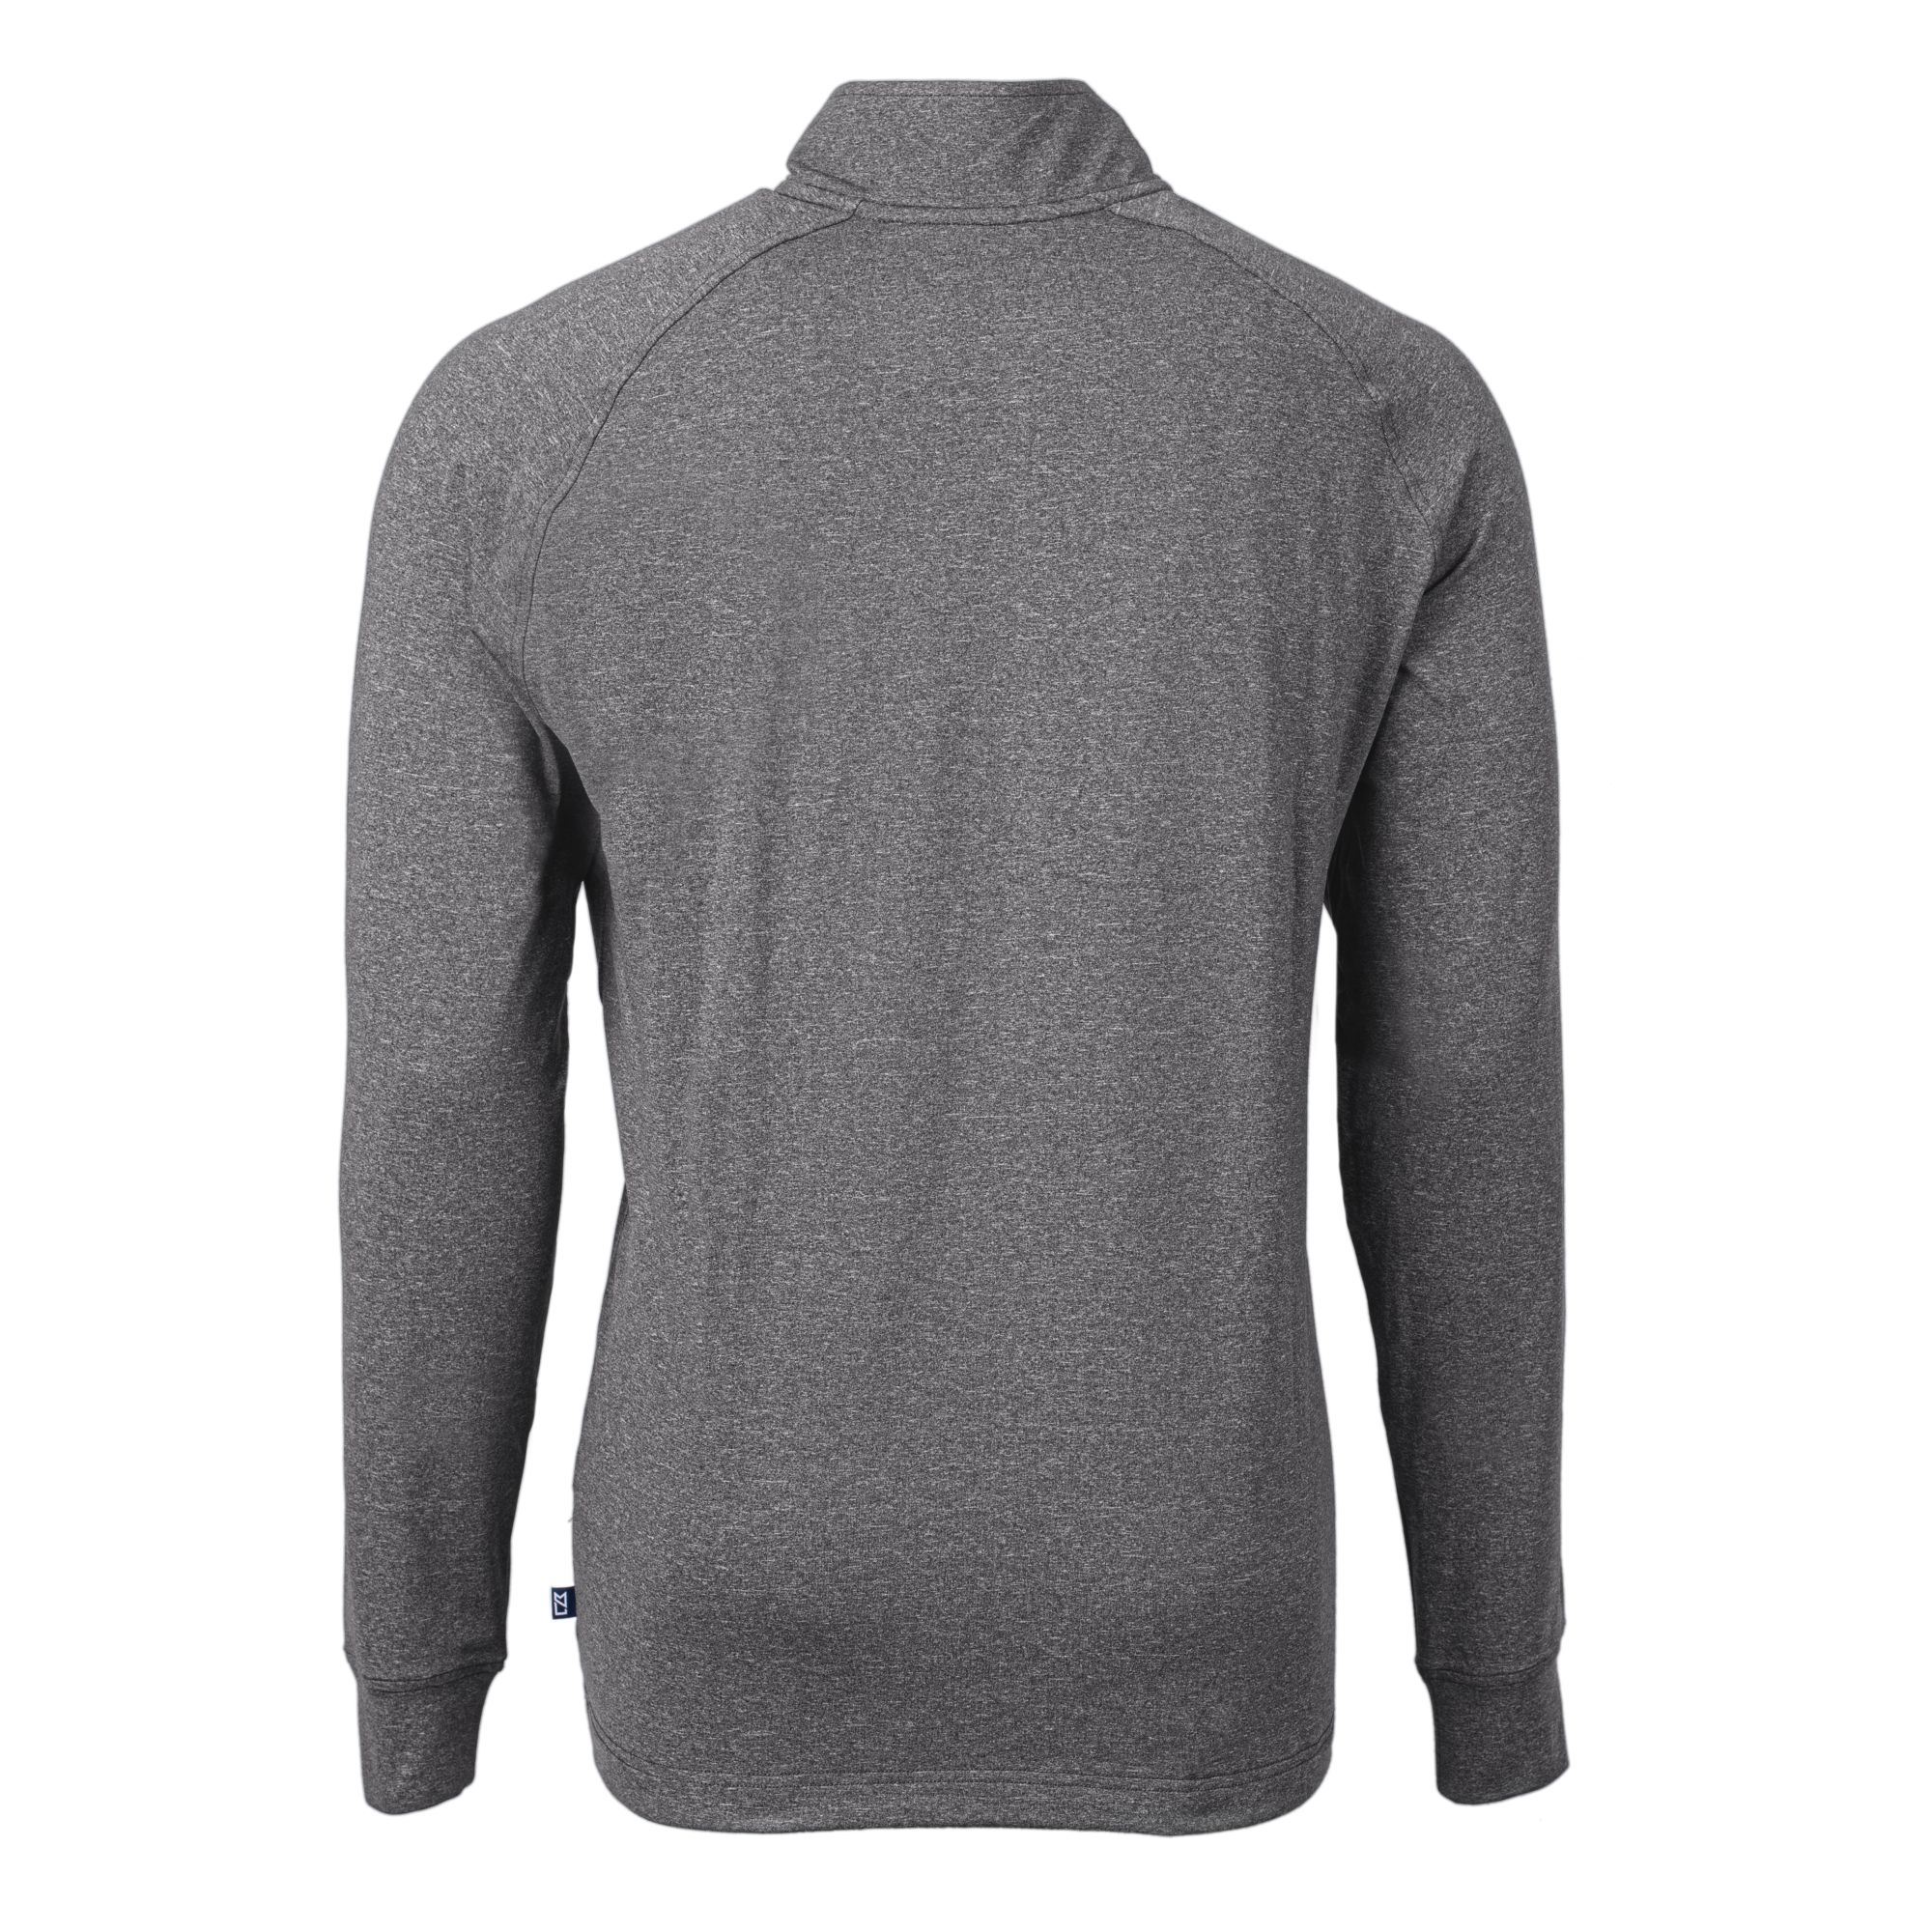 Men's Cutter & Buck  Heather Black Pacific Tigers Big & Tall Adapt Eco Knit Quarter-Zip Pullover Top - image 3 of 3